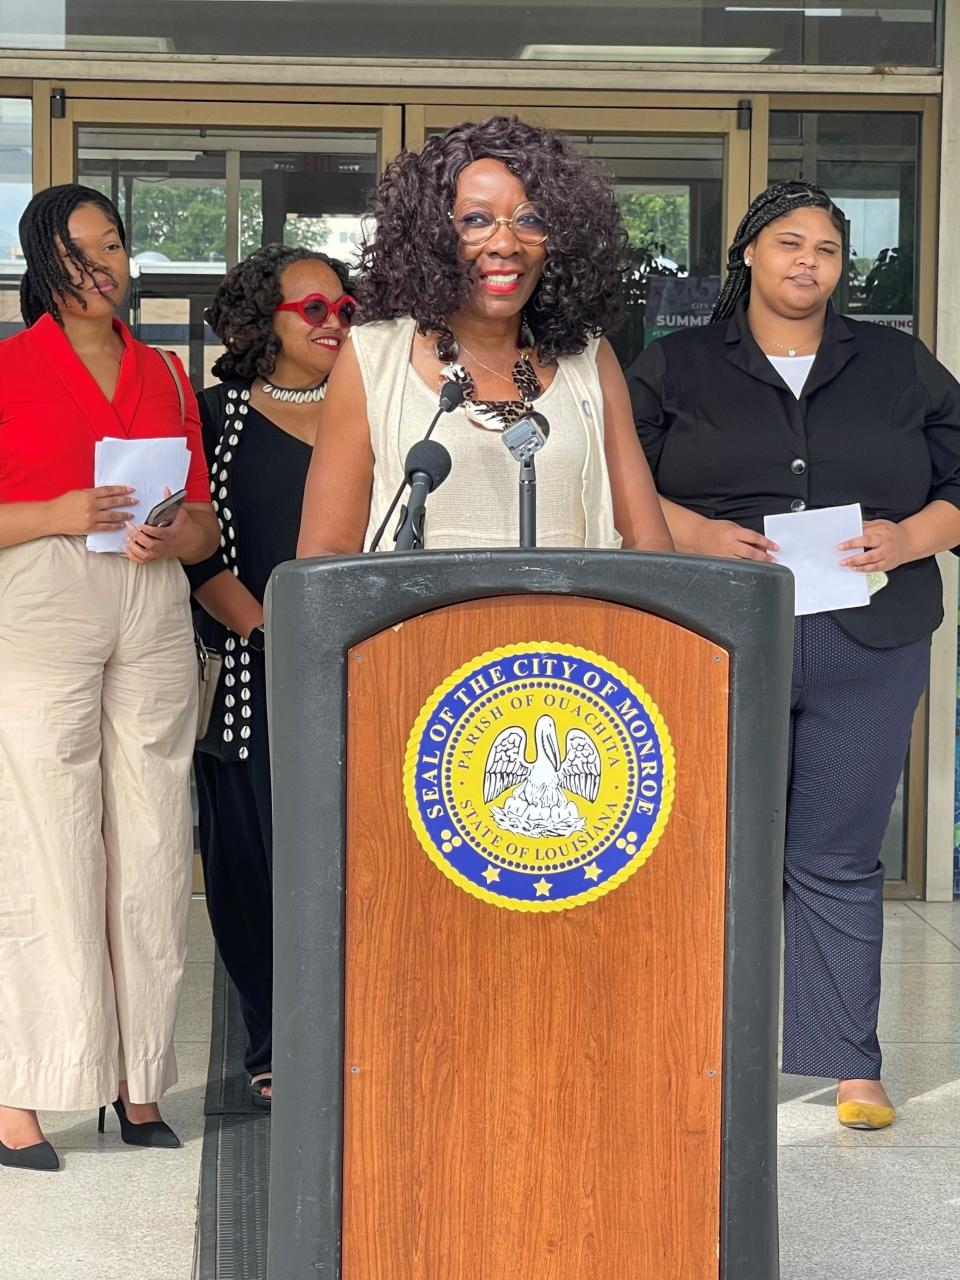 Monroe City Councilwoman Juanita Woods announced Juneteenth Celebration Month at a press conference Monday morning on the steps of Monroe City Hall.